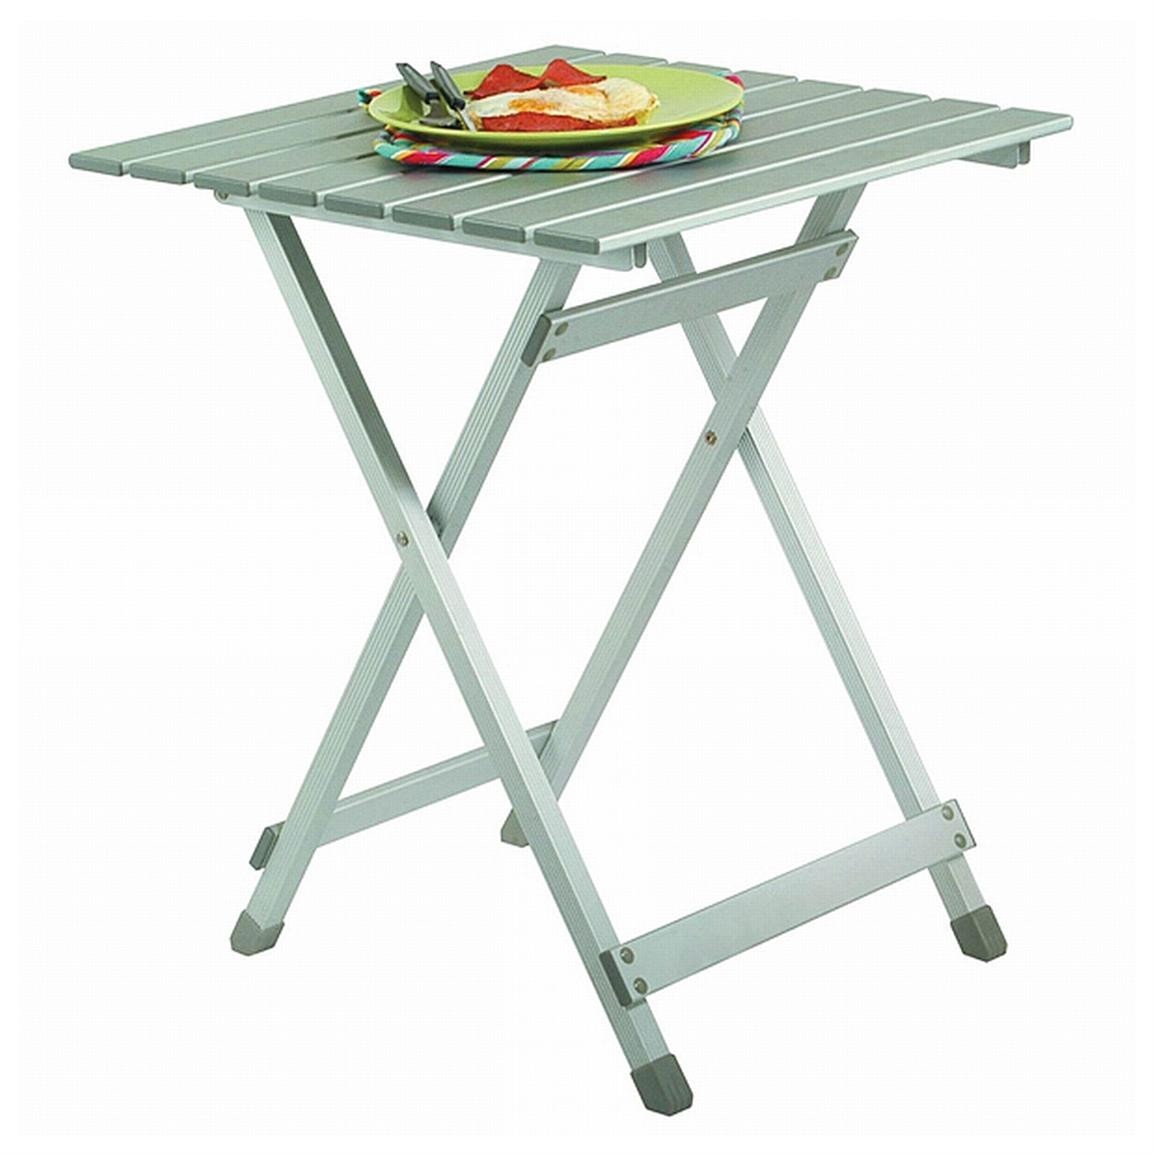 Small easy fold square aluminum table 425499 tables at